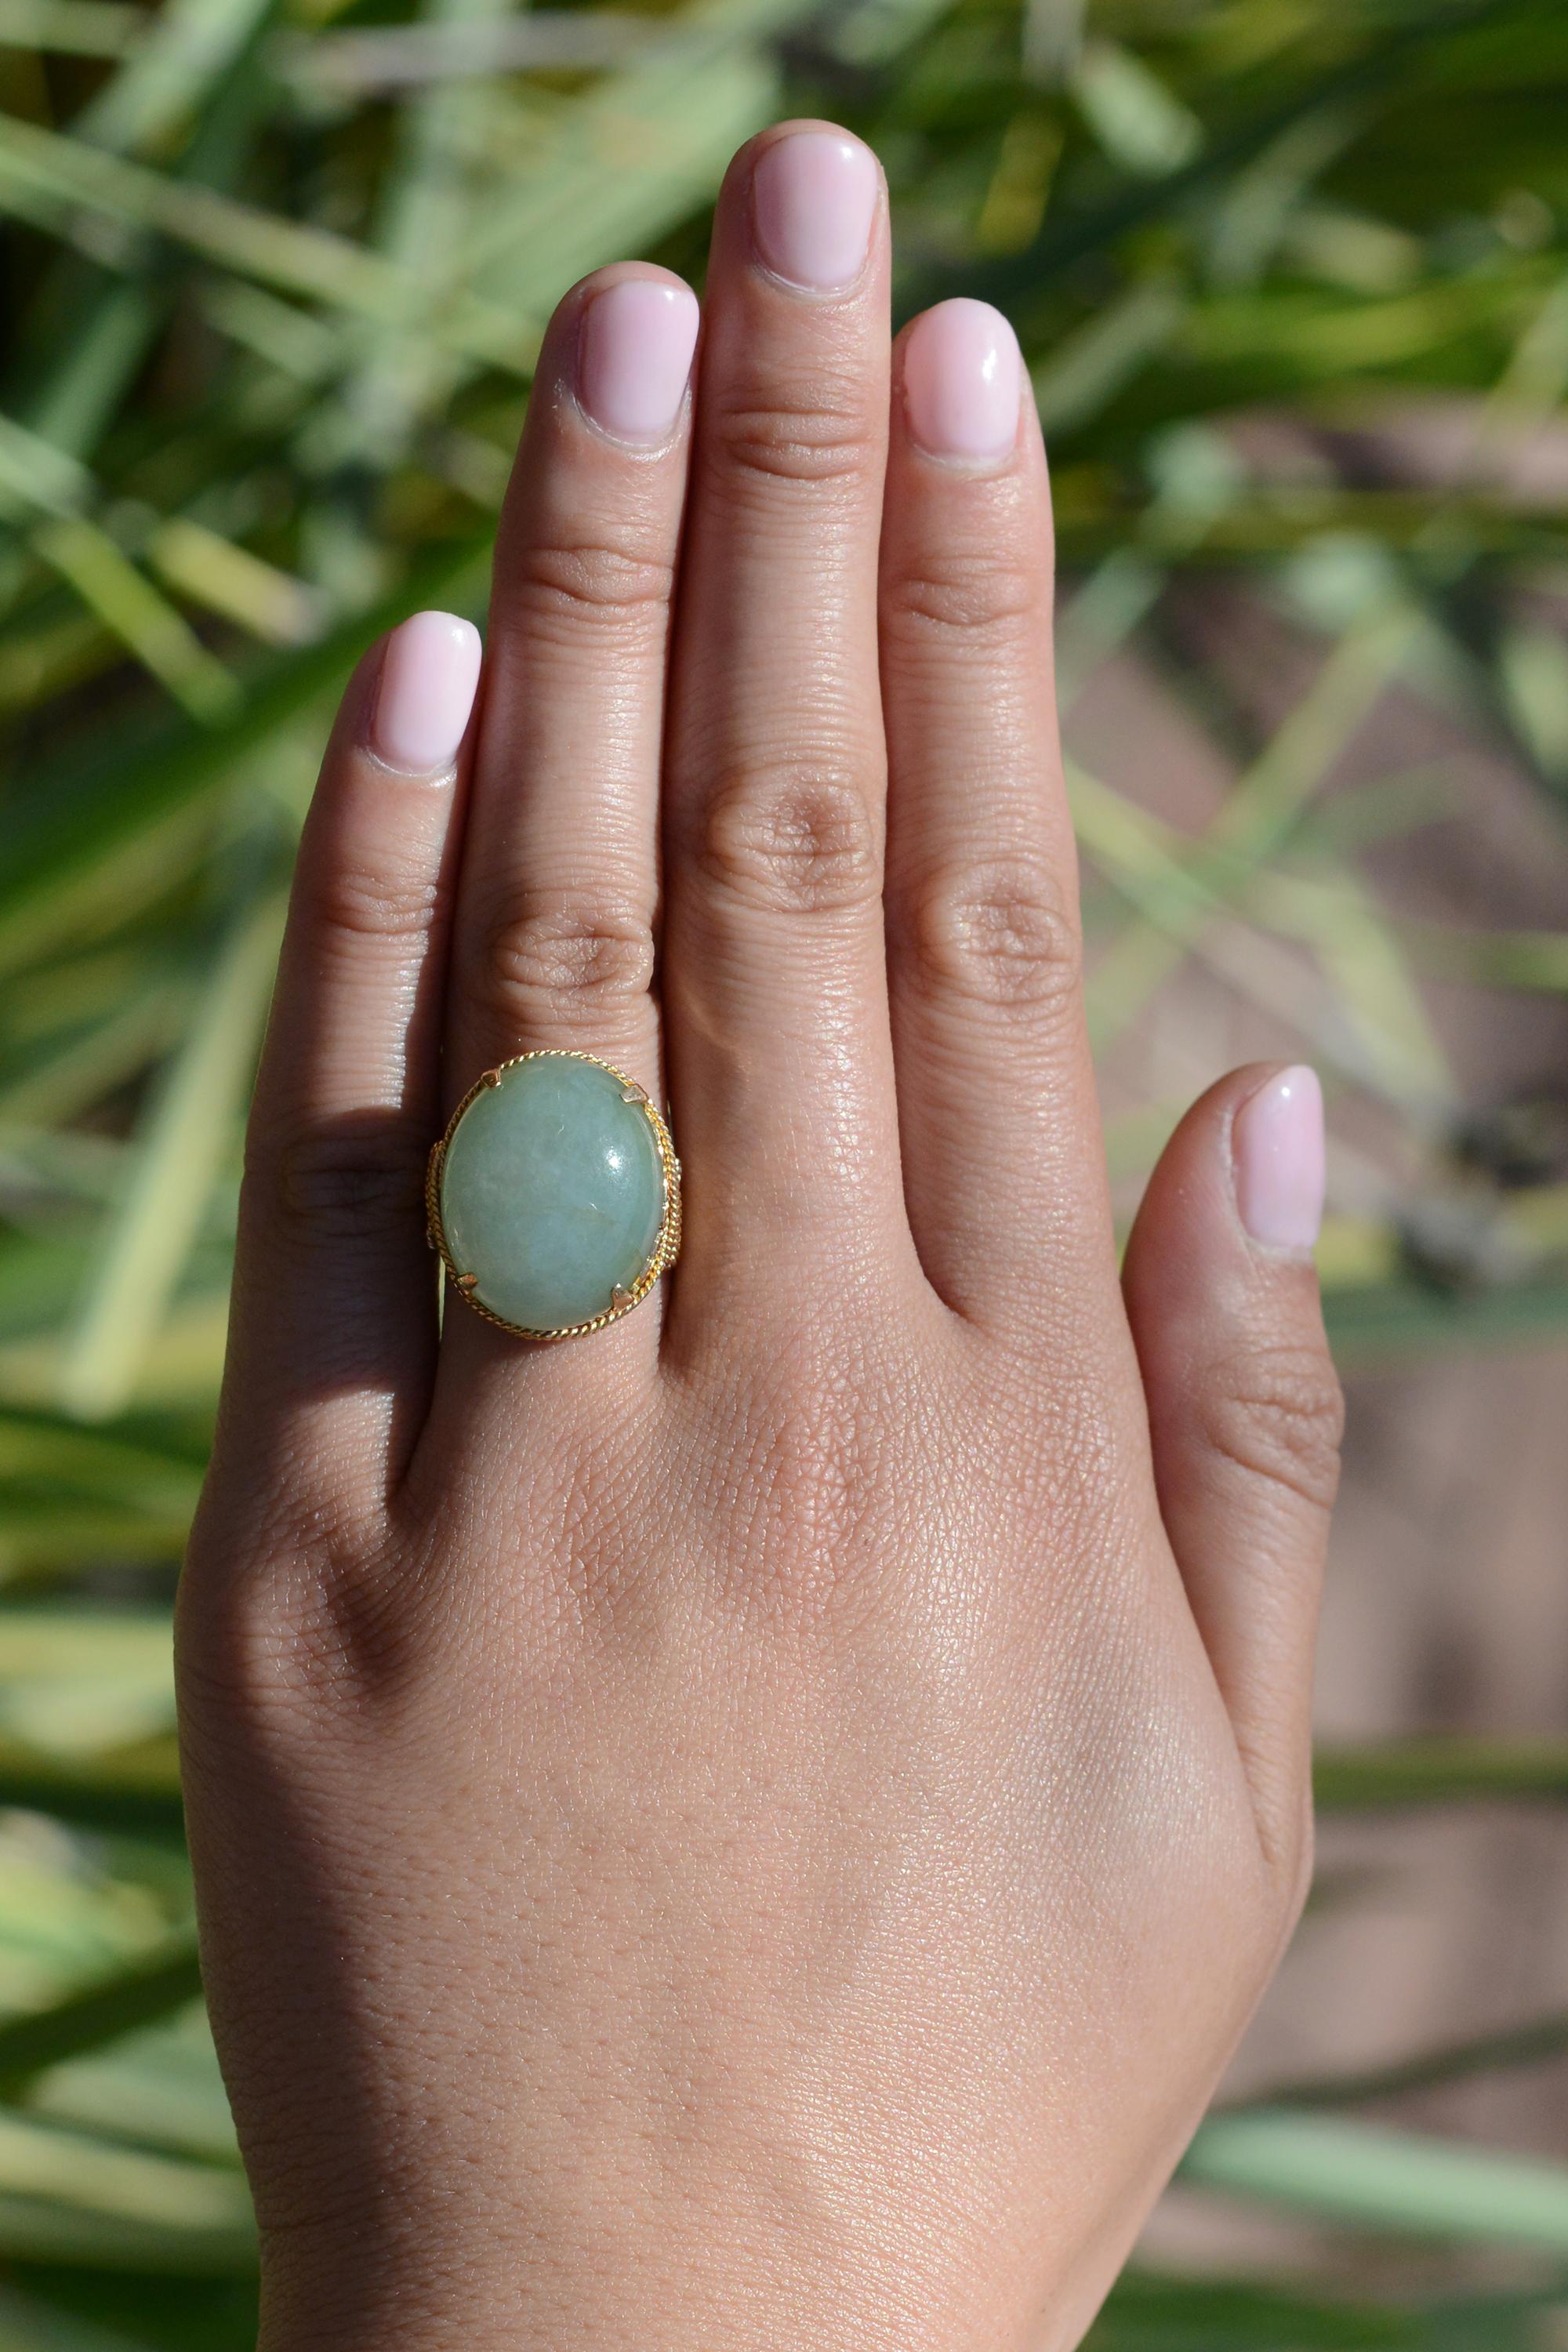 This affordable authentic 1940s vintage Retro cocktail ring is a true collector's item. Crafted in 18k gold with a lovely, rosy patina and centered by a large oval jade cabochon of an alluring, soothing sea foam green. A classic statement ring sure